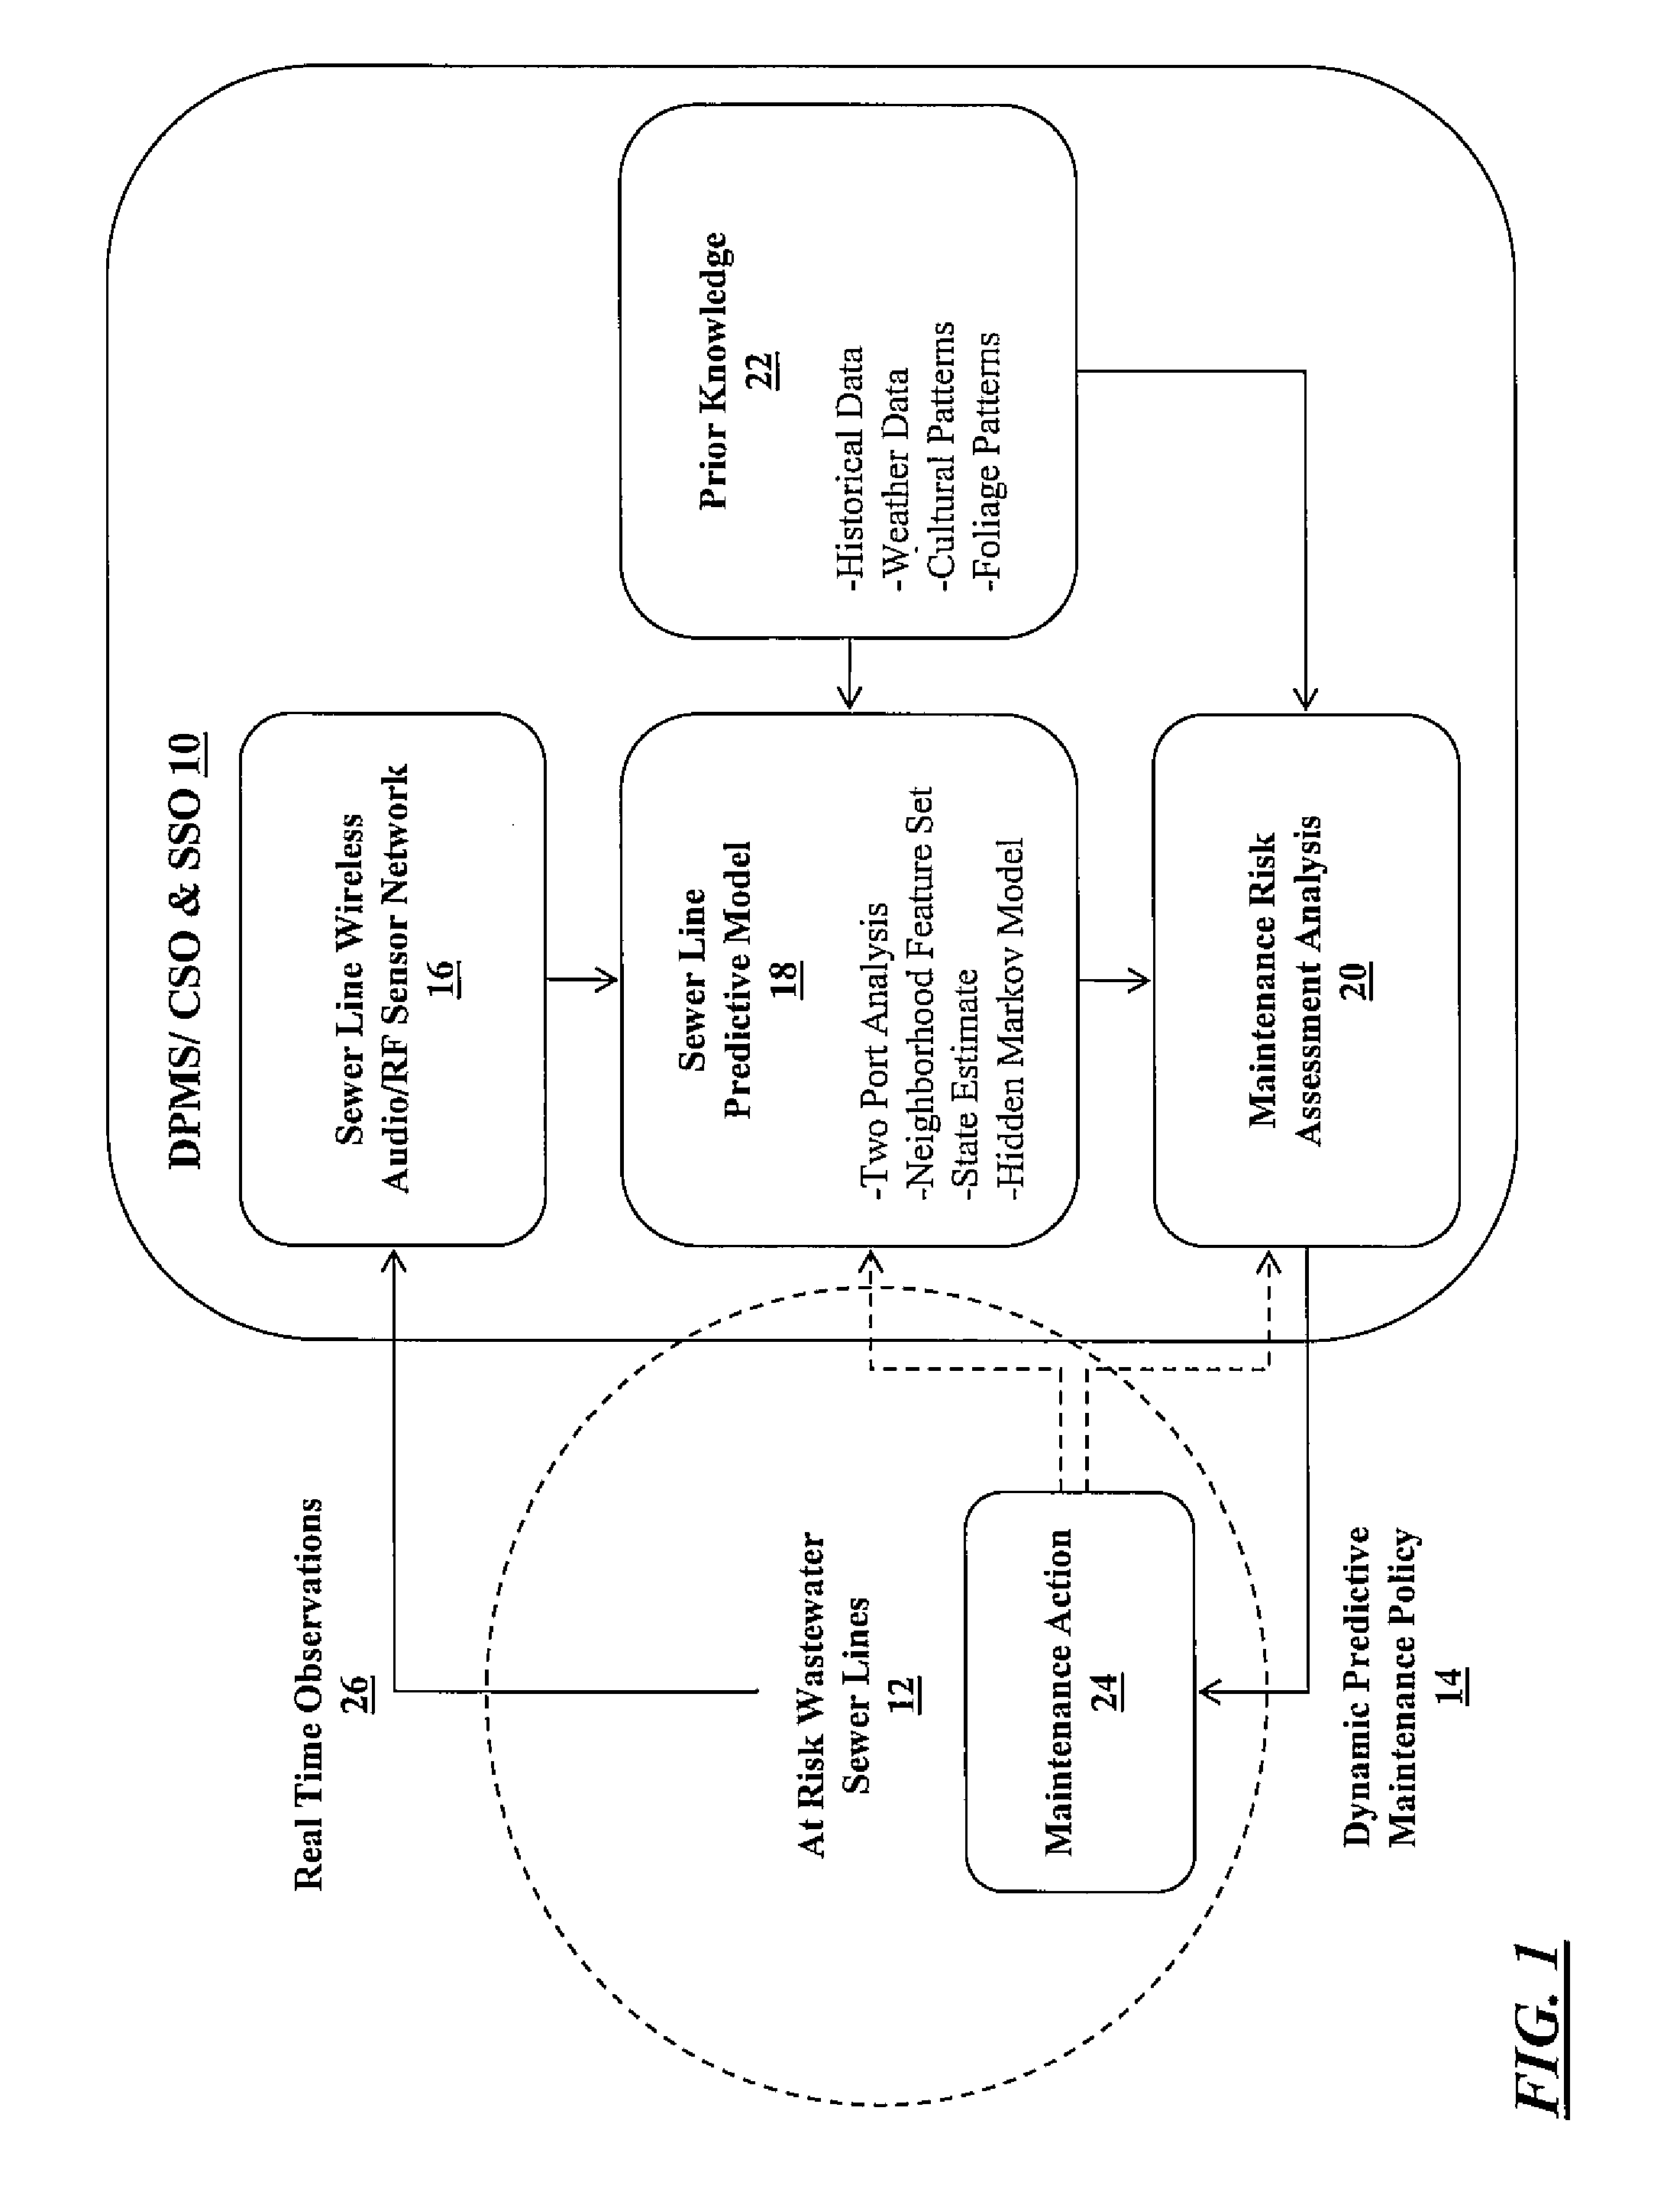 Monitoring systems and methods for sewer and other conduit systems